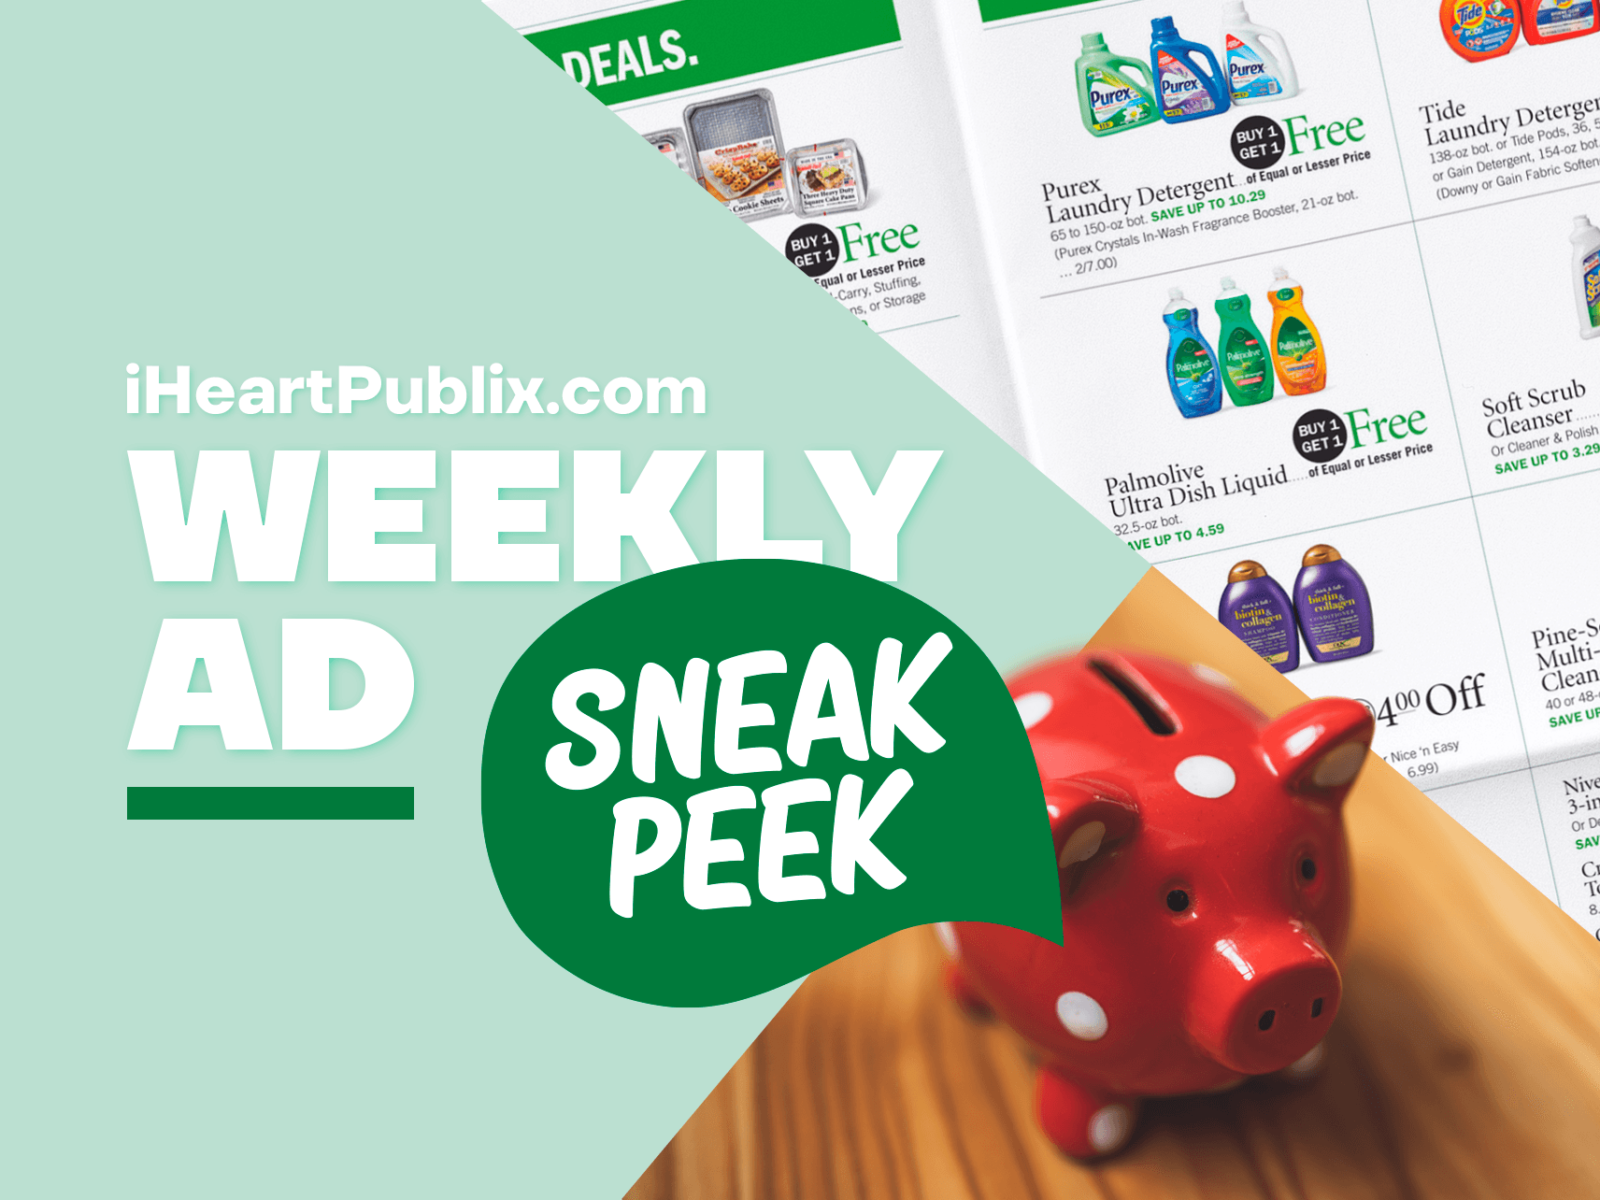 Publix Ad & Coupons Week Of 8/24 to 8/30 (8/23 to 8/29 For Some)